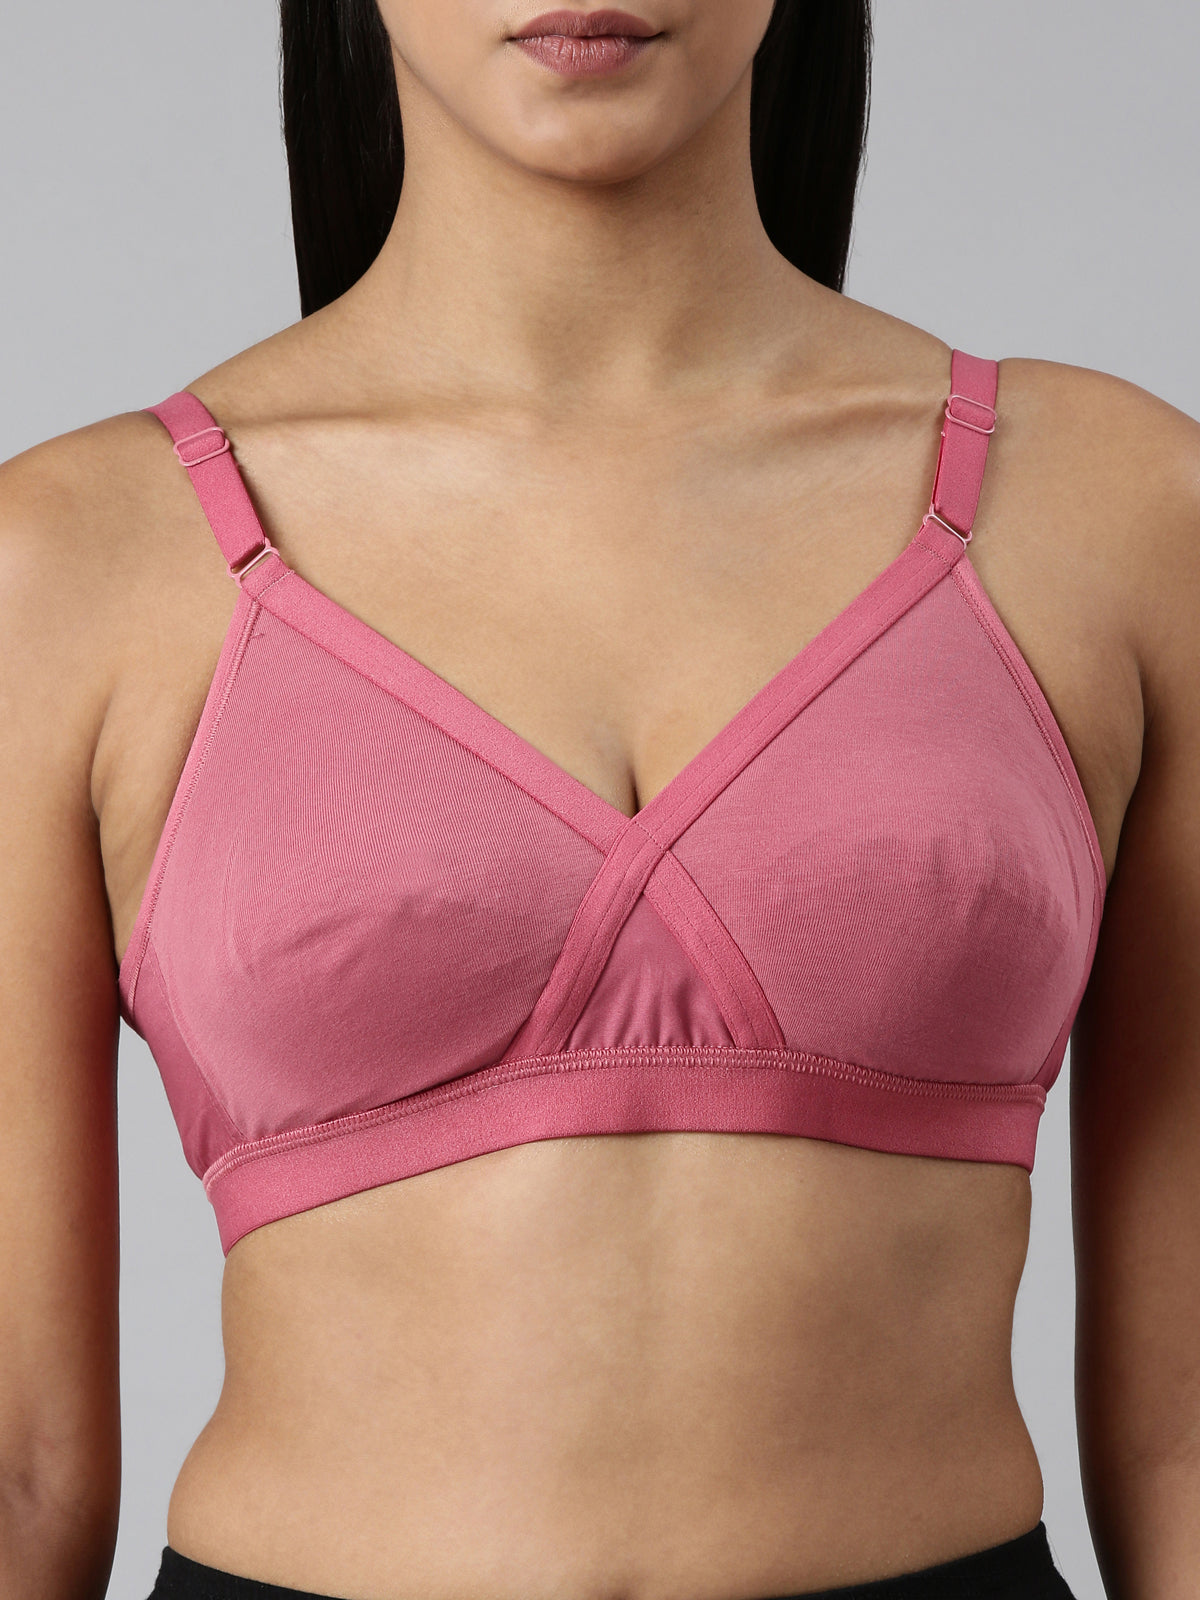 blossom-cotton cross-rose gold1-Woven knitted-support bra